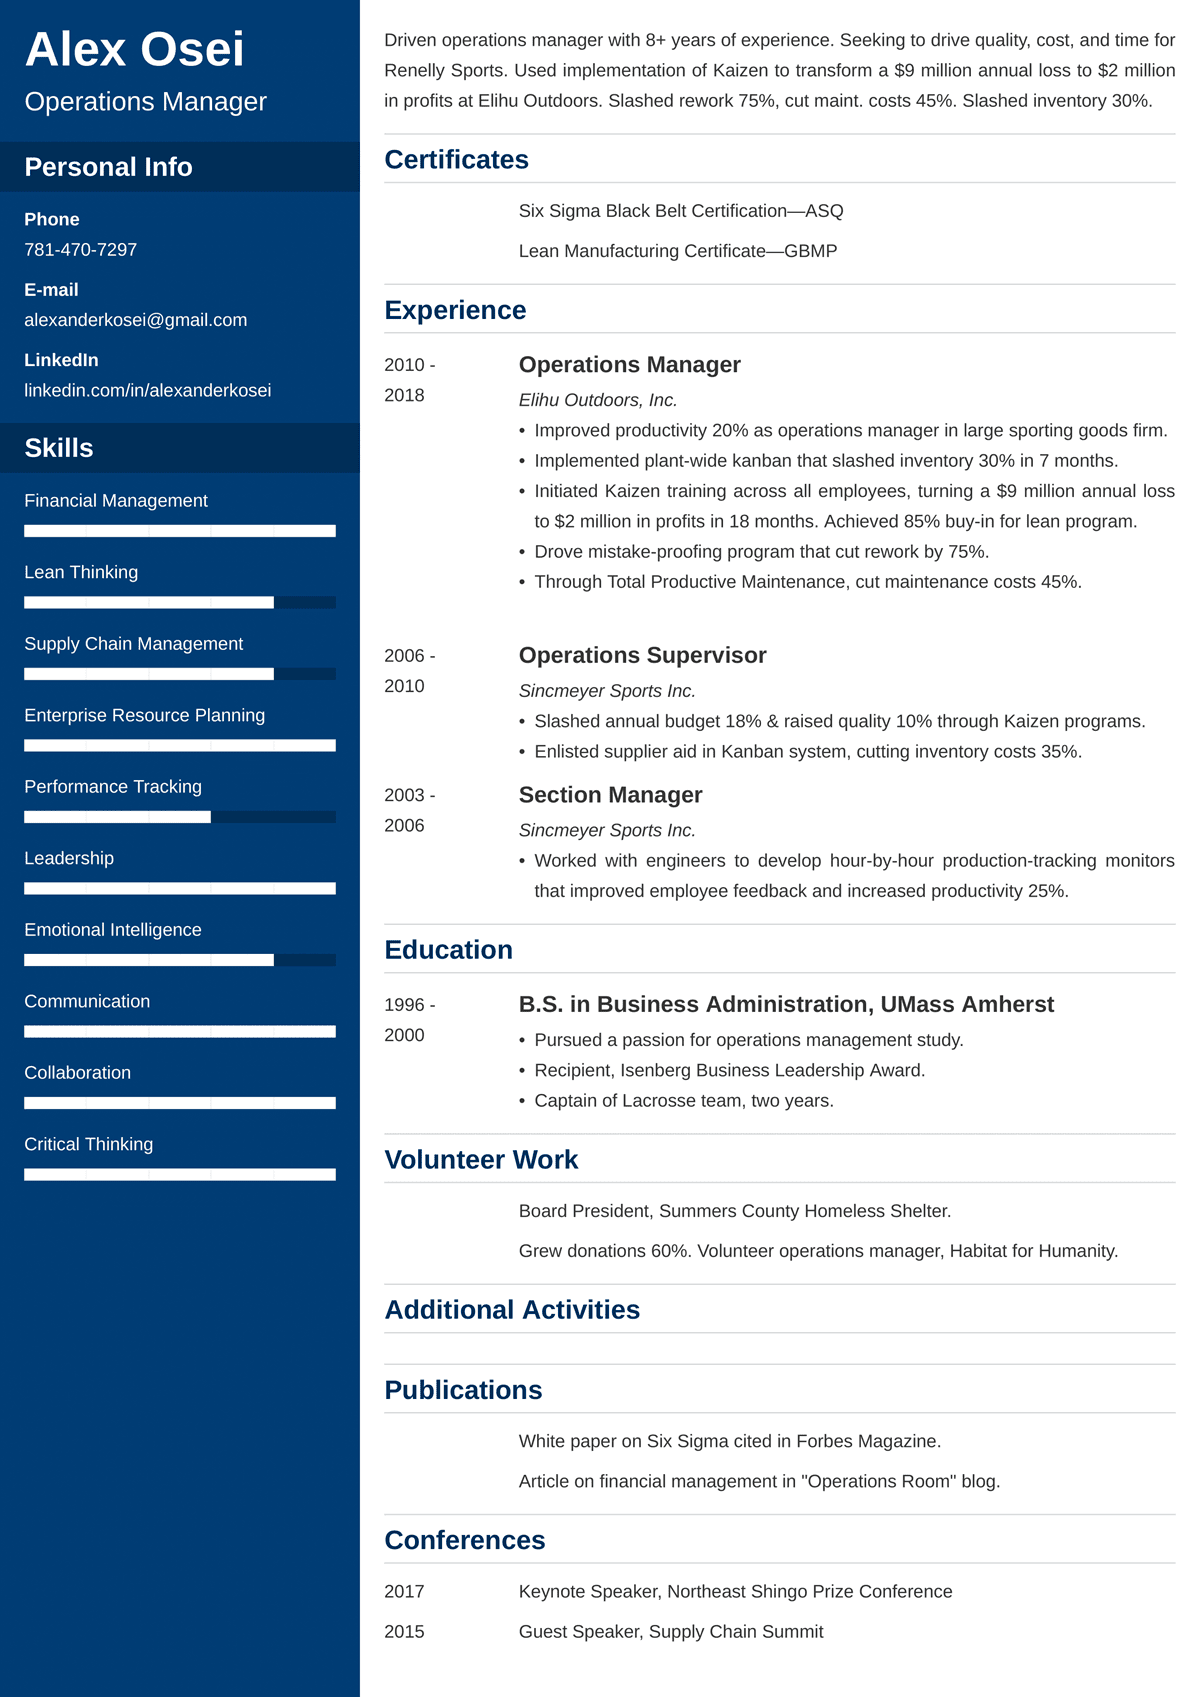 Operations Manager CV Sample 25  Examples and Writing Tips